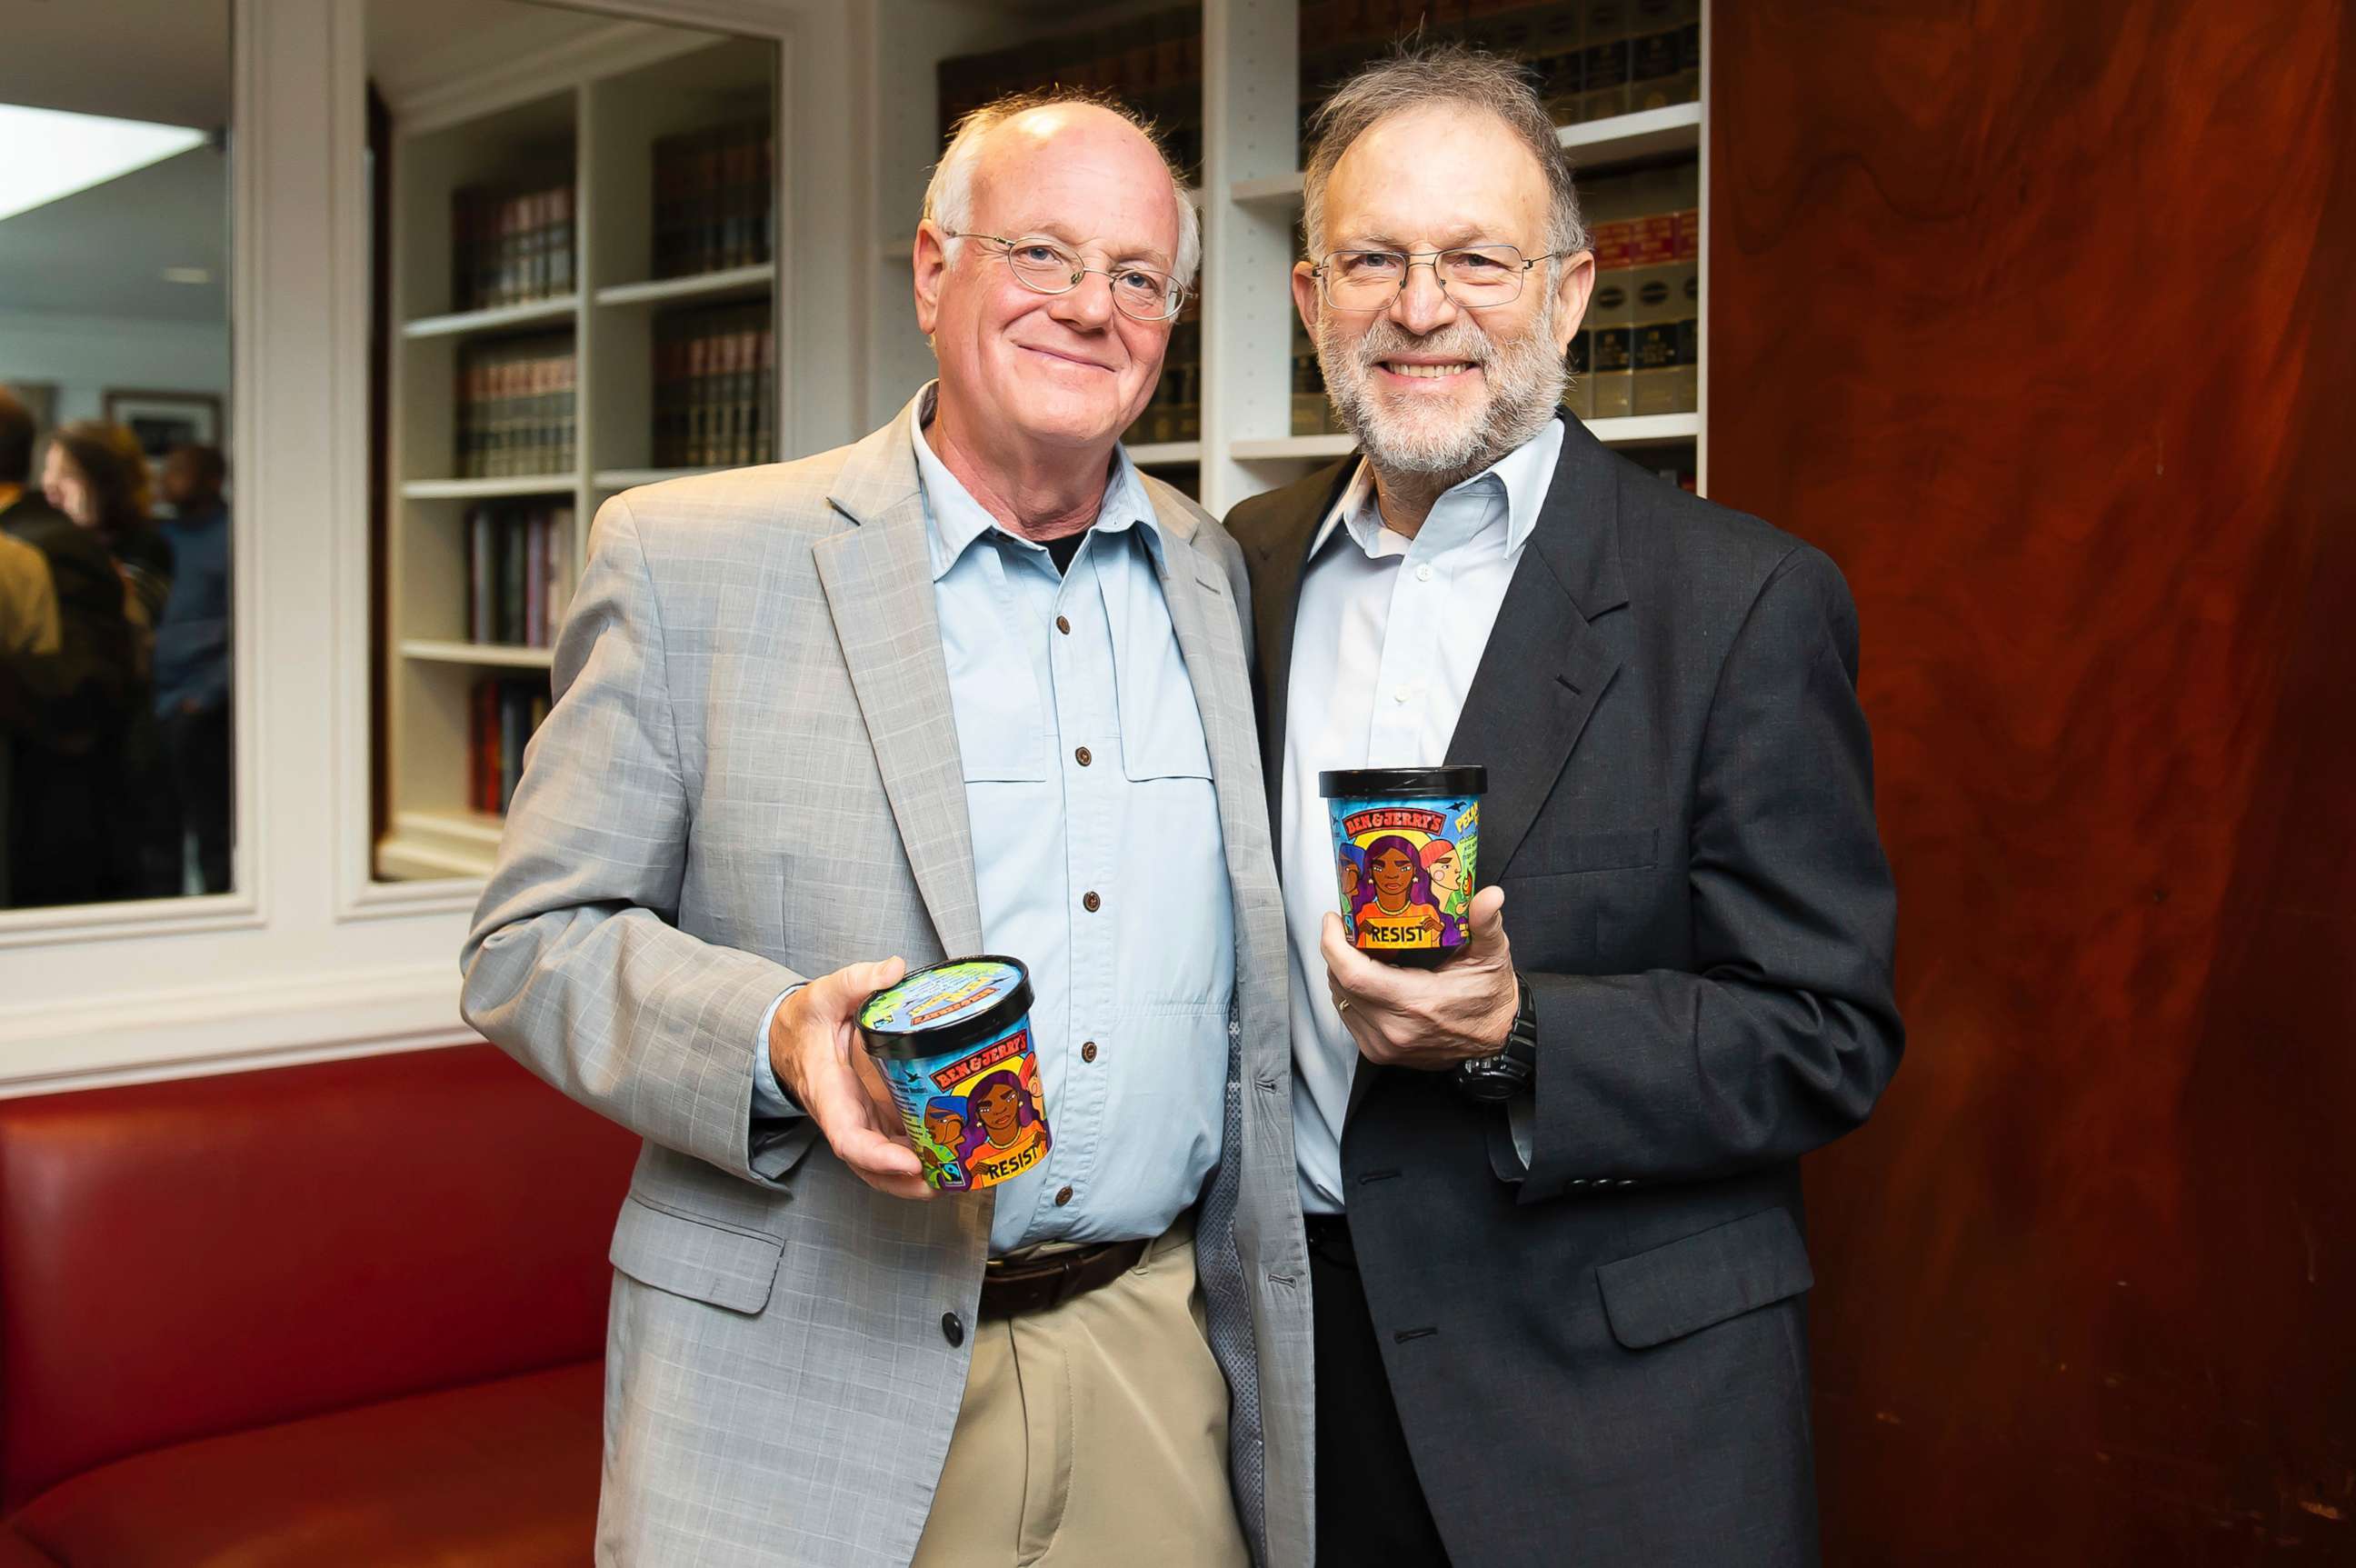 PHOTO: Ben Cohen and Jerry Greenfield, Co-Founders of Ben & Jerry's, help launch Pecan Resist, a new flavor of ice-cream that supports four progressive organizations, Oct. 30, 2018, in Washington.